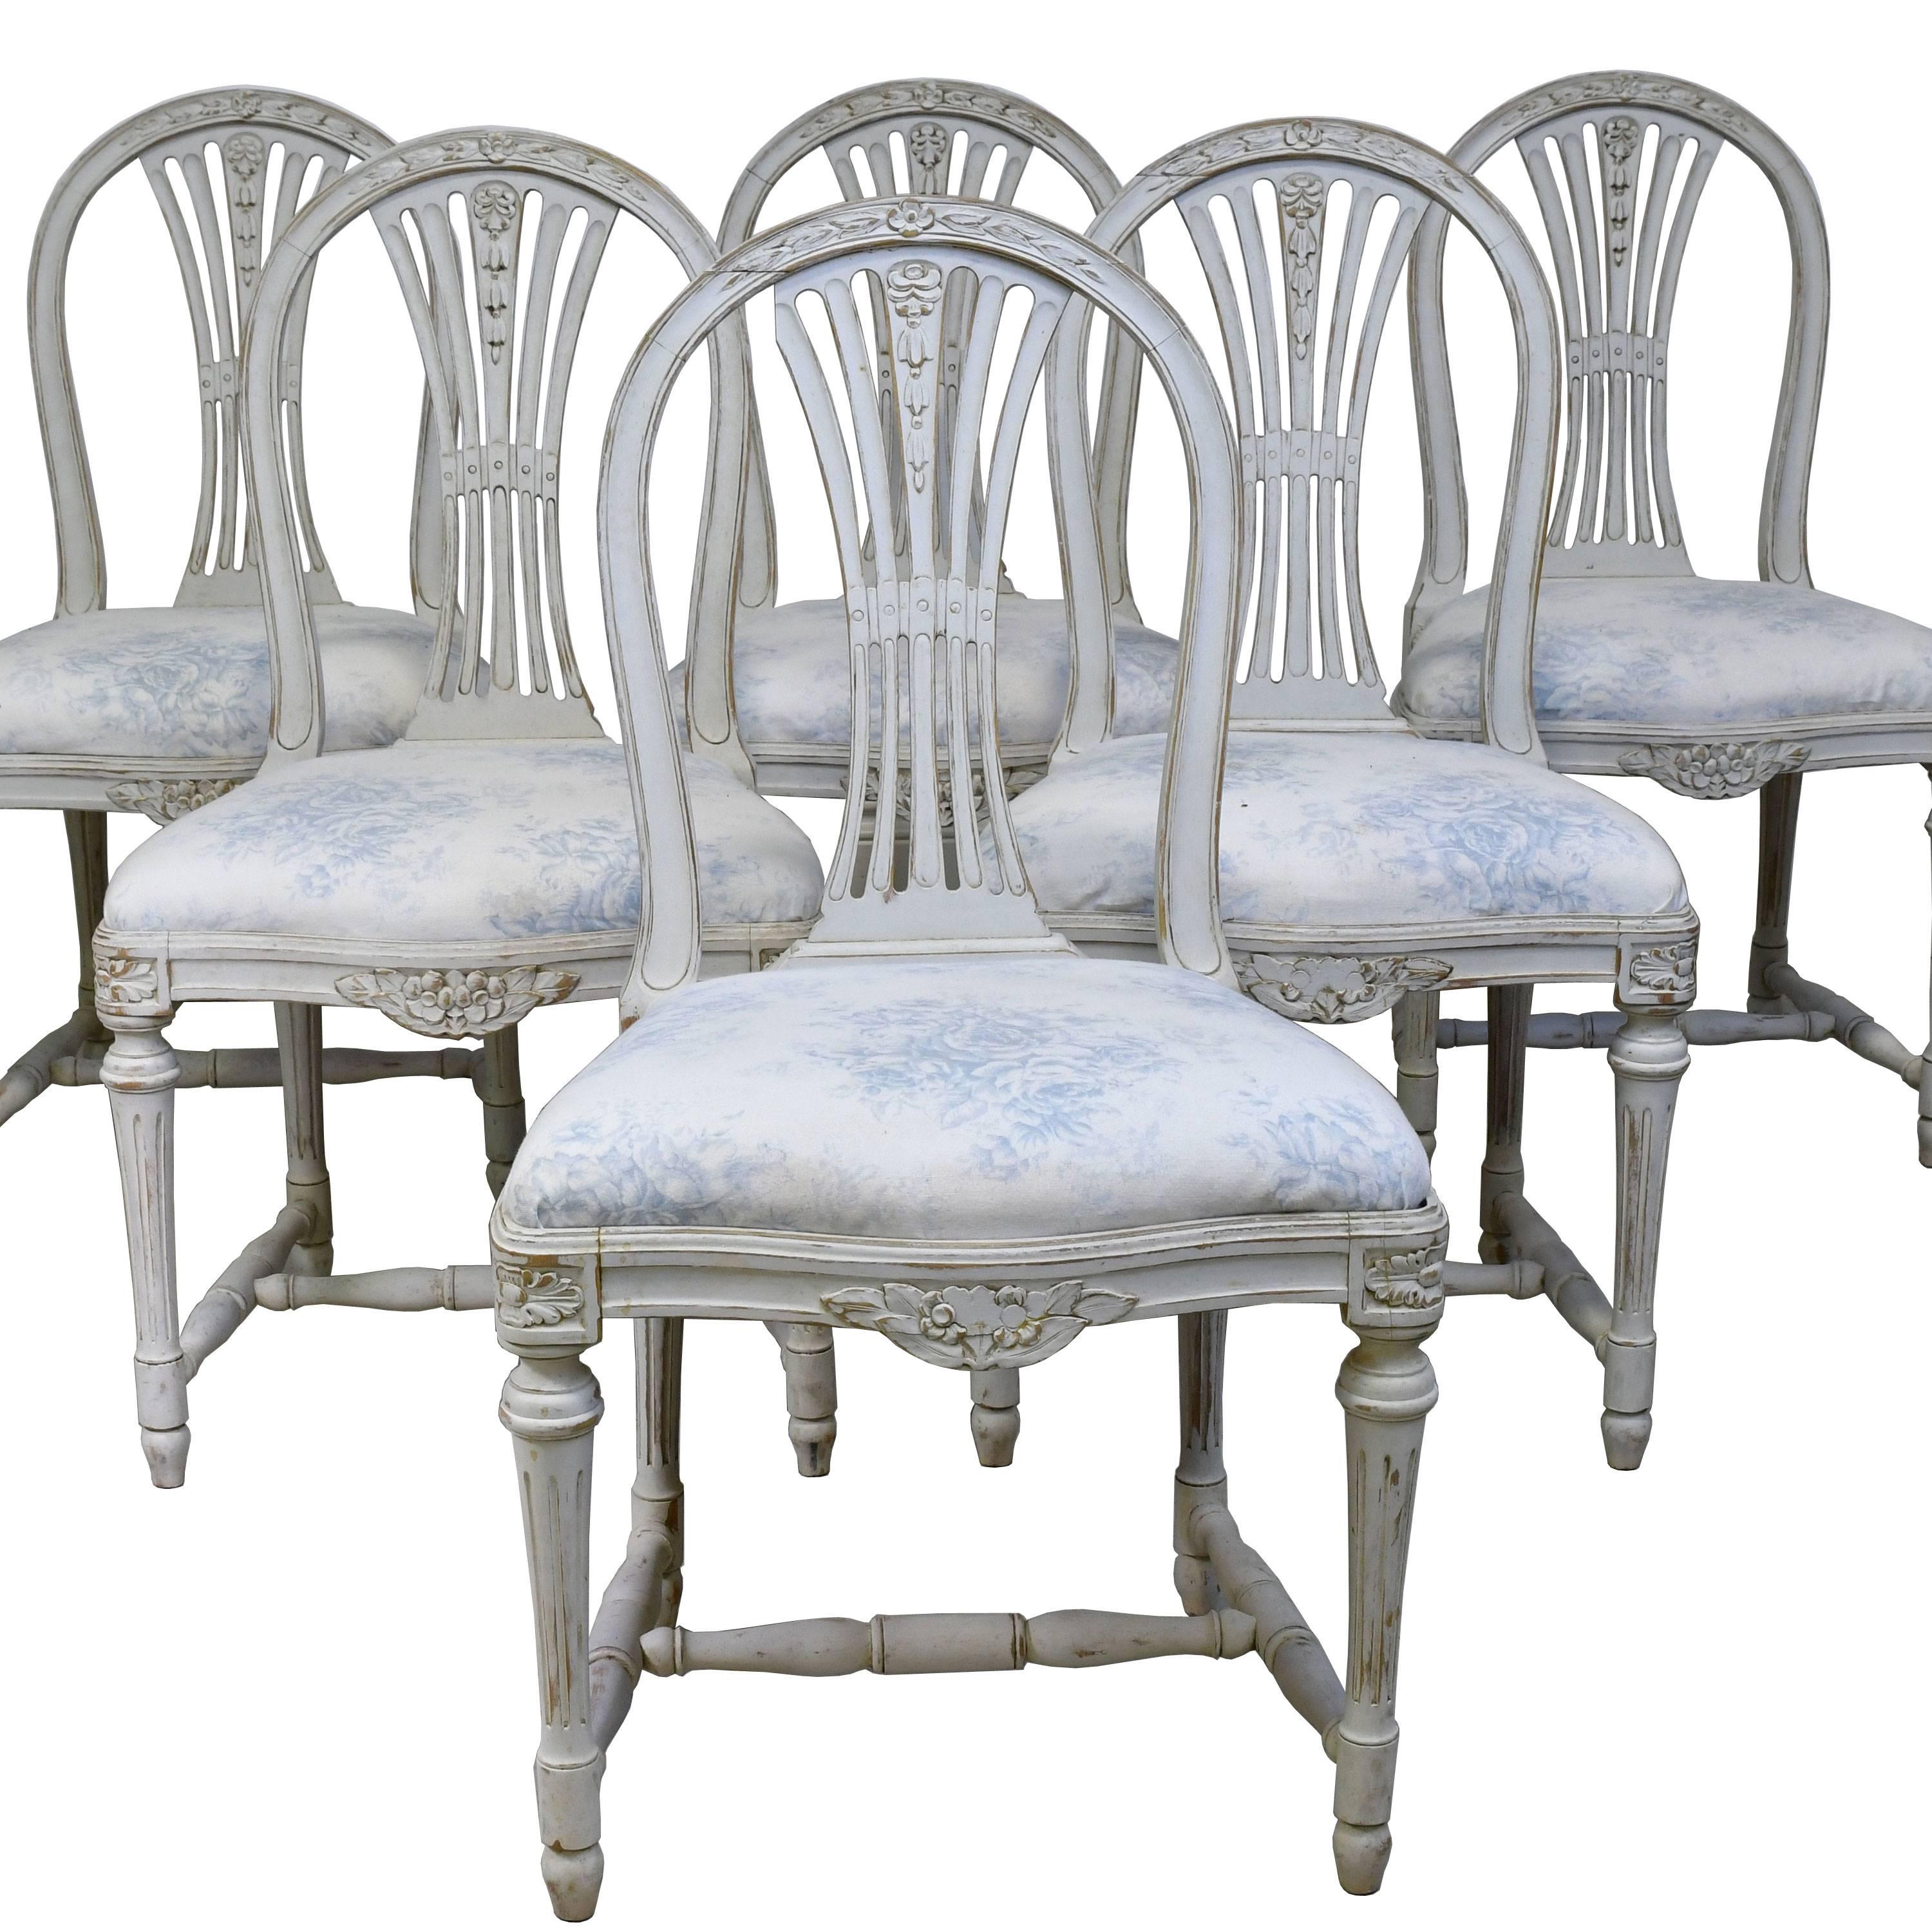 A lovely set of six (6) Gustavian-style dining chairs from the late 1800's with 18th century Lindome Gustavian style frames in a painted grey/white finish and with upholstered slip seat. Chairs have a carved sheaf-back, serpentine seat with foliate